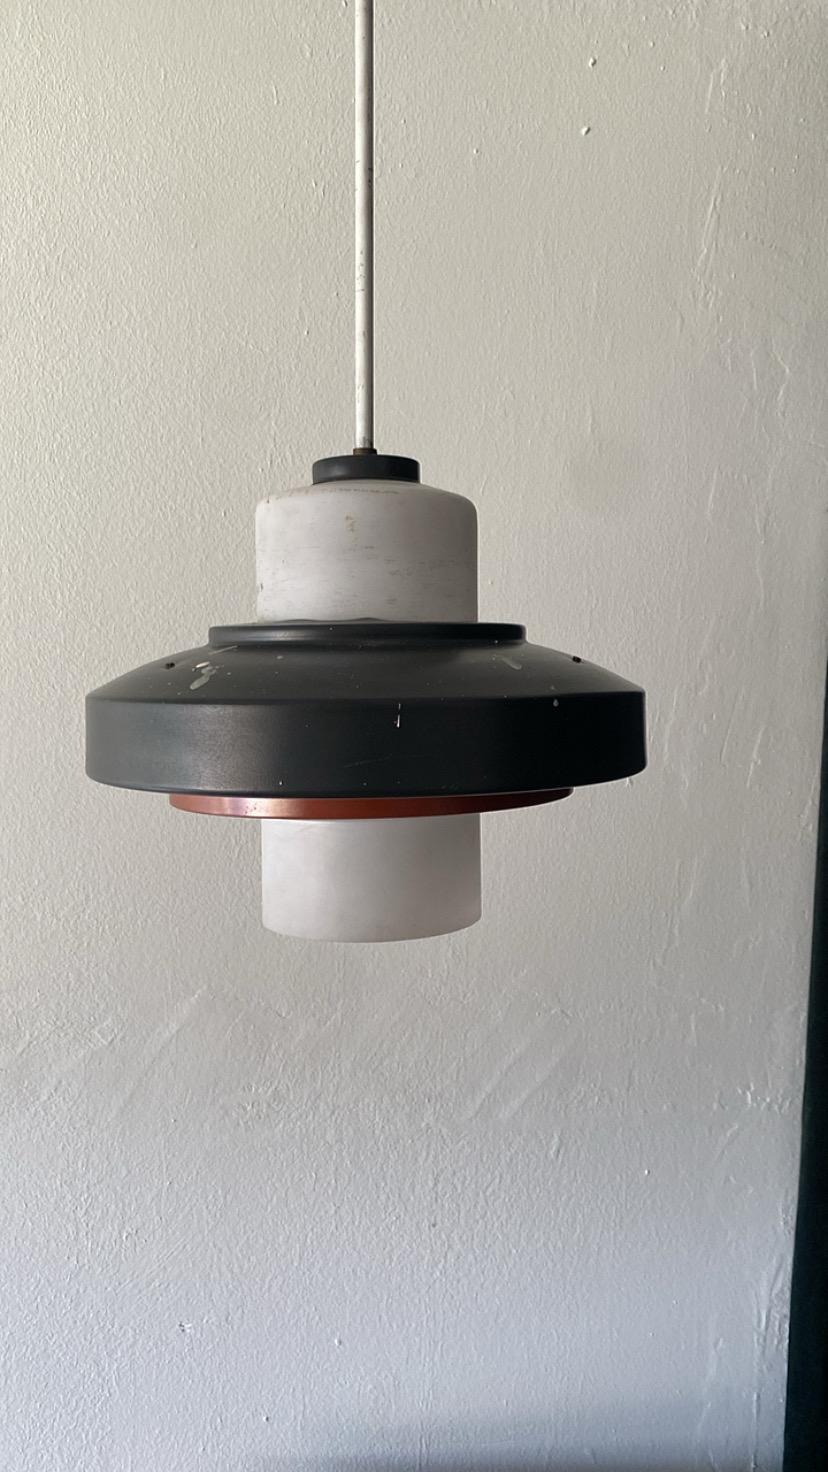 Stilnovo ceiling pendant. Manufactured in the 1960s made of opaline glass and metal. Corded is enclosed in a metal rod but can be changed out for a fabric cord. Has one medium base socket/ drop can be made longer or shorter